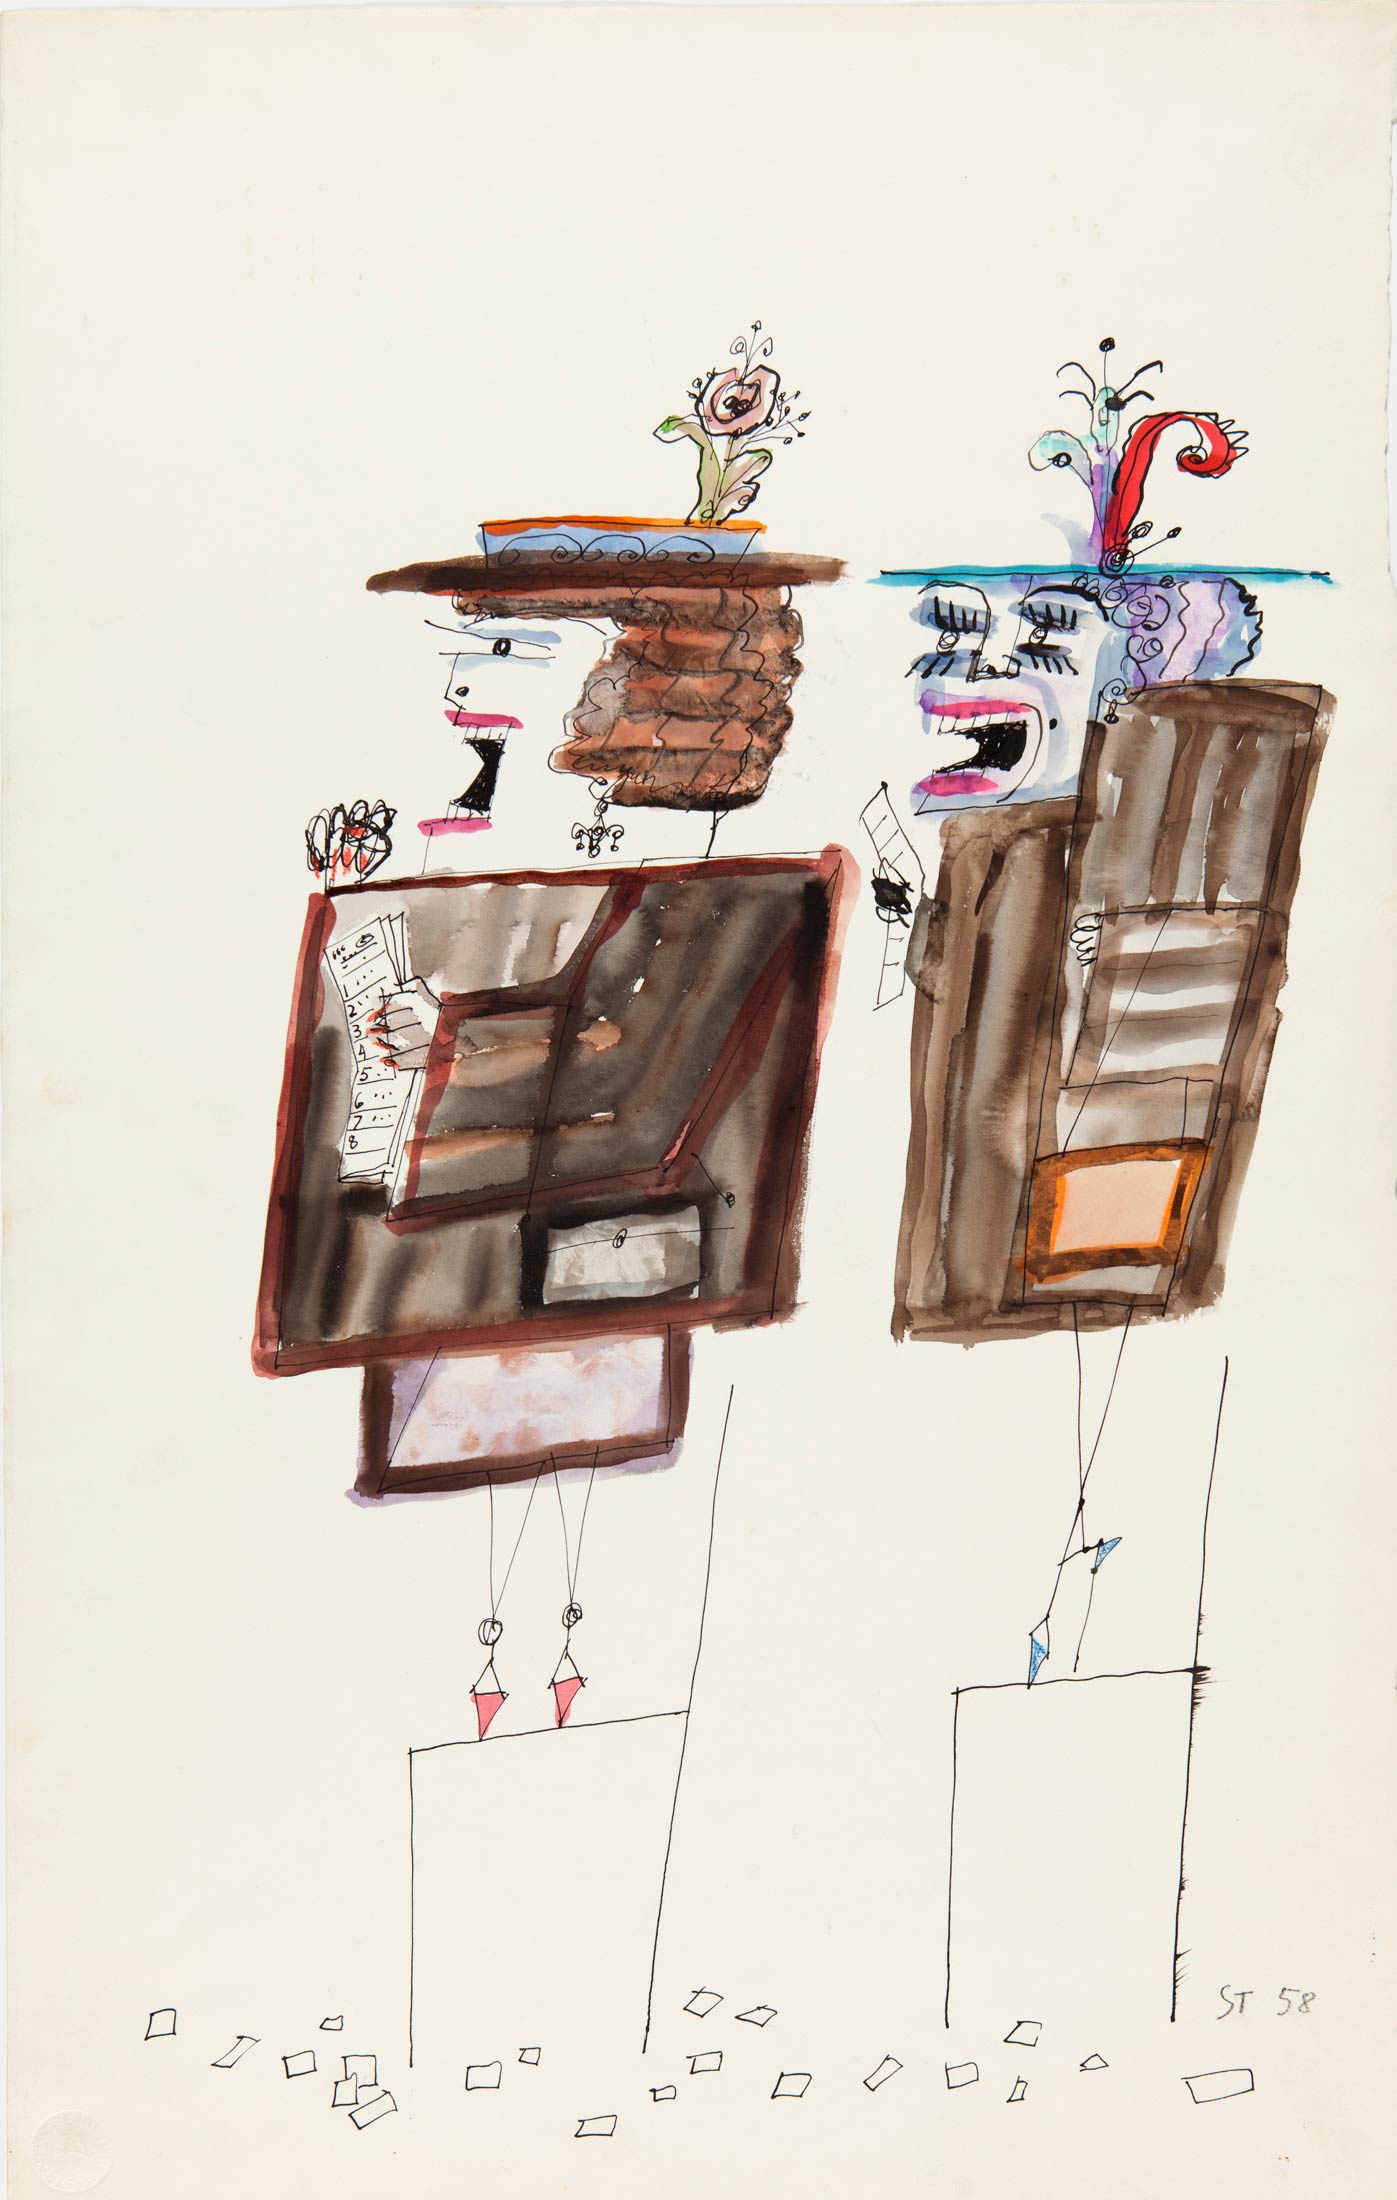 <em>Untitled [At the Racetrack]</em>, c. 1958. Ink, crayon, and watercolor on paper, 14 ½ x 23 in. The Saul Steinberg Foundation.